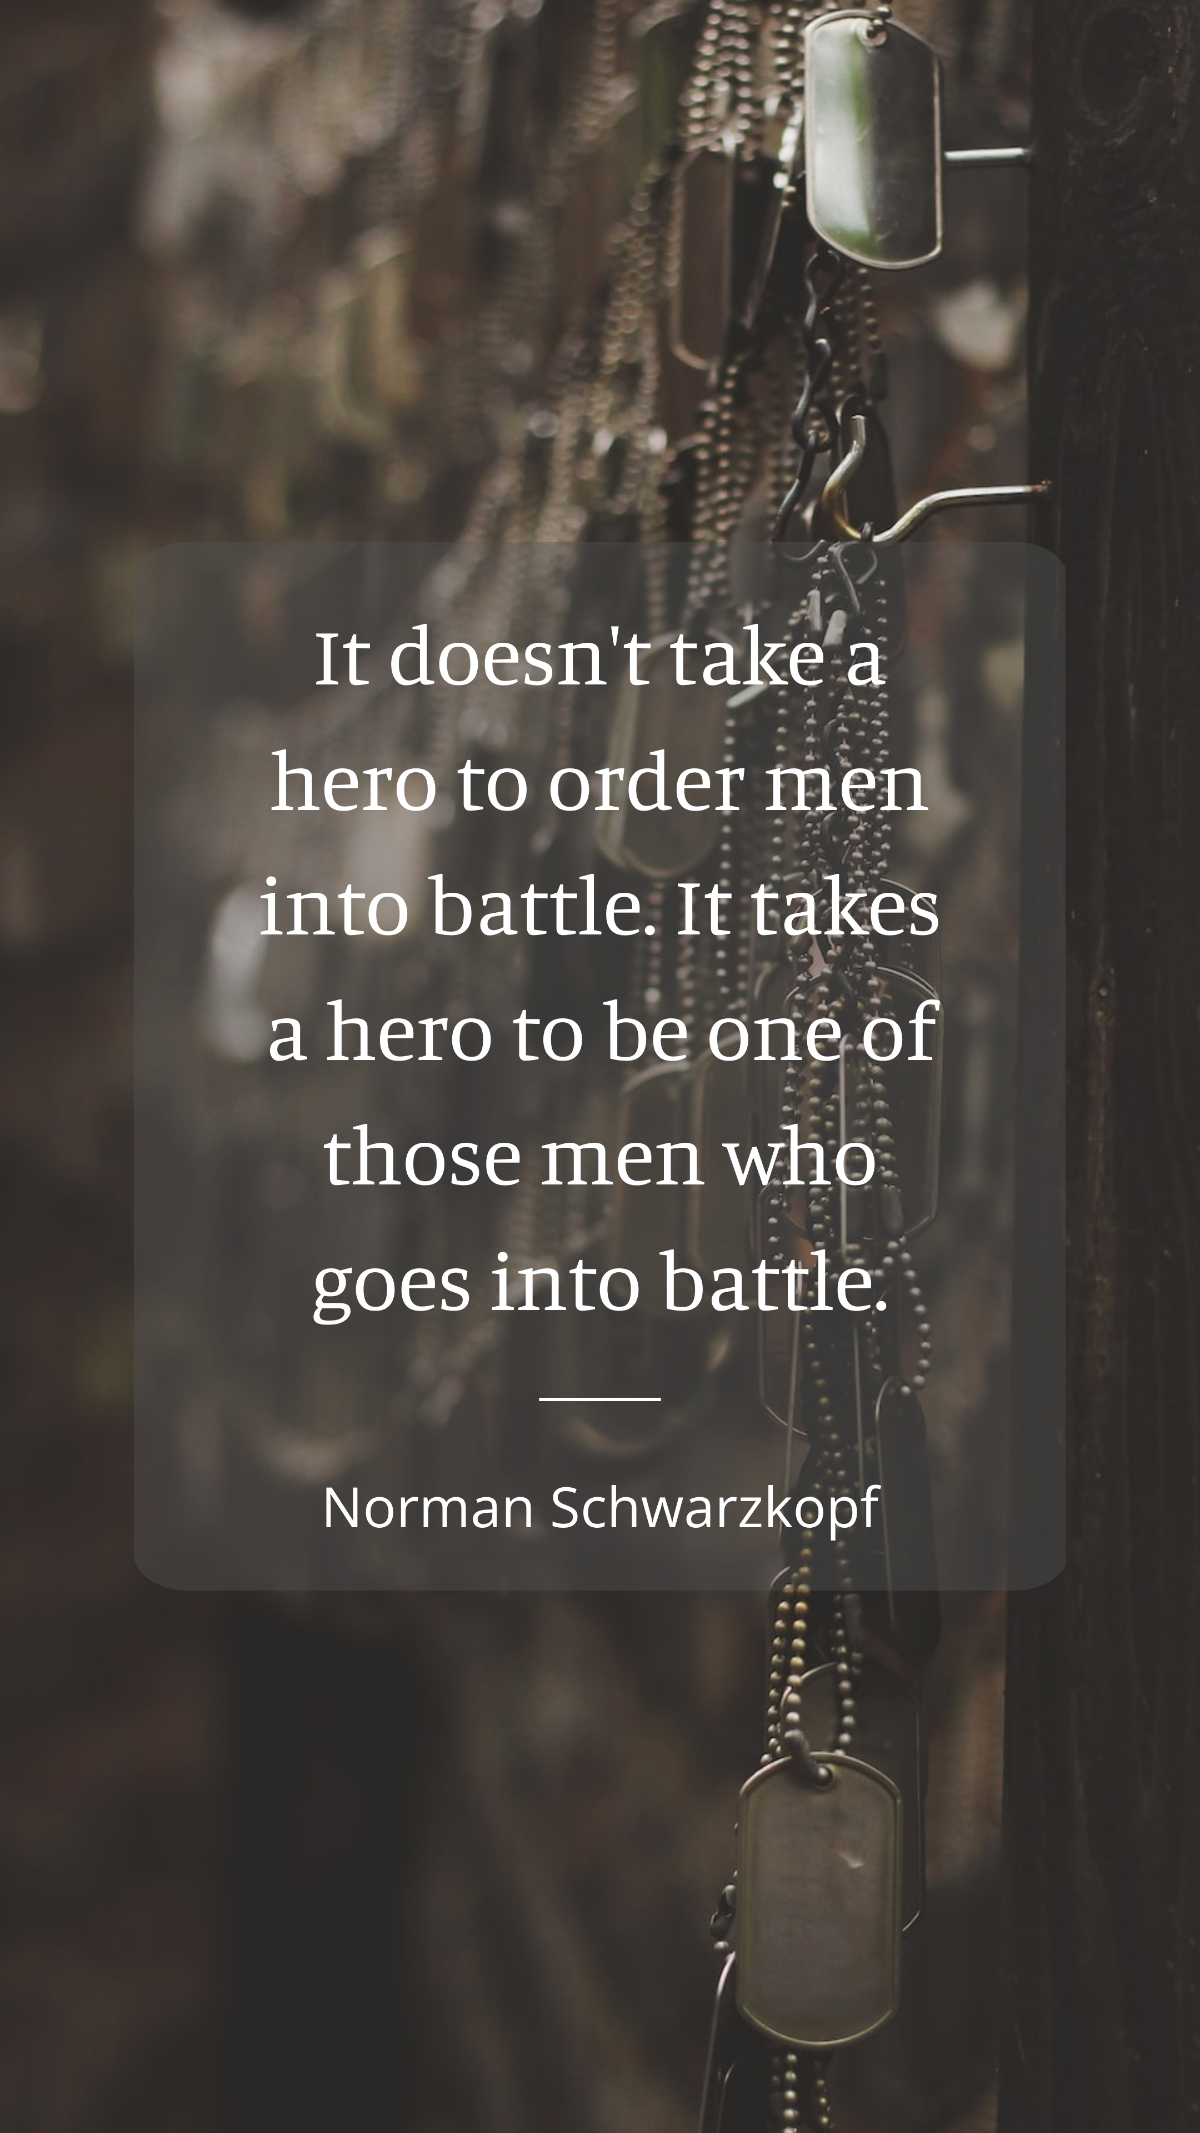 Free Norman Schwarzkopf - It doesn't take a hero to order men into battle. It takes a hero to be one of those men who goes into battle. Template